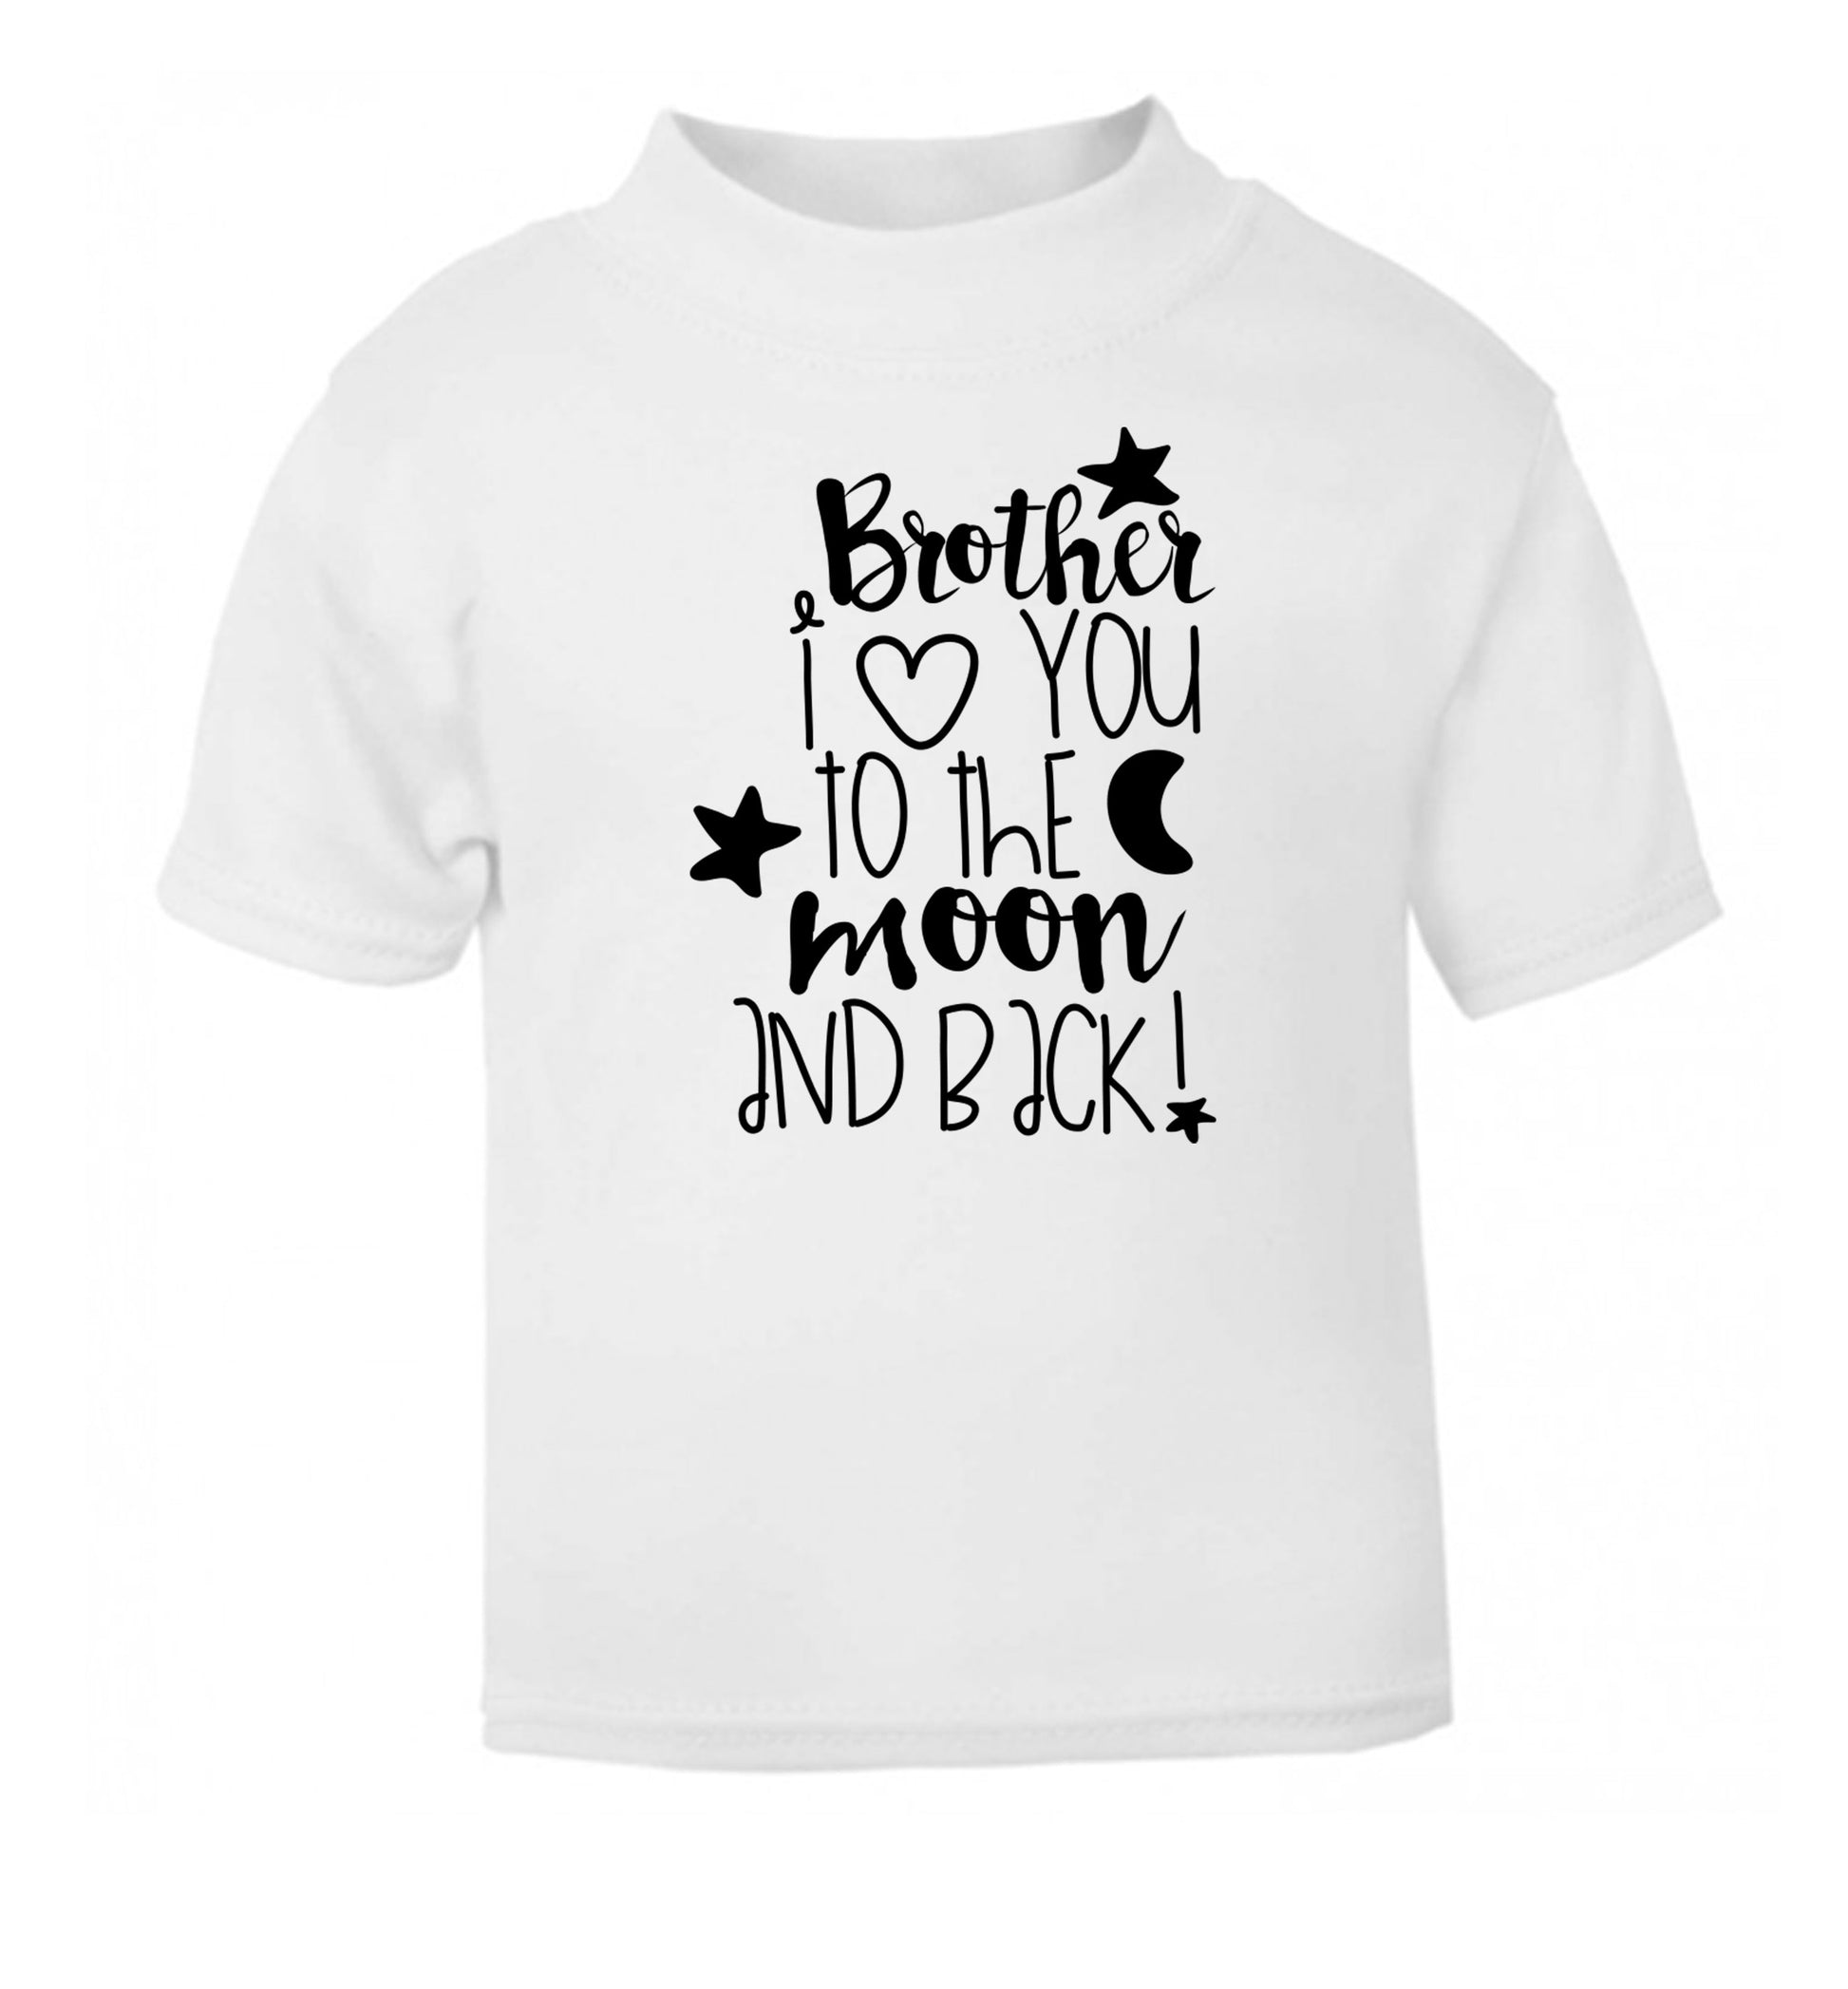 Brother I love you to the moon and back white Baby Toddler Tshirt 2 Years